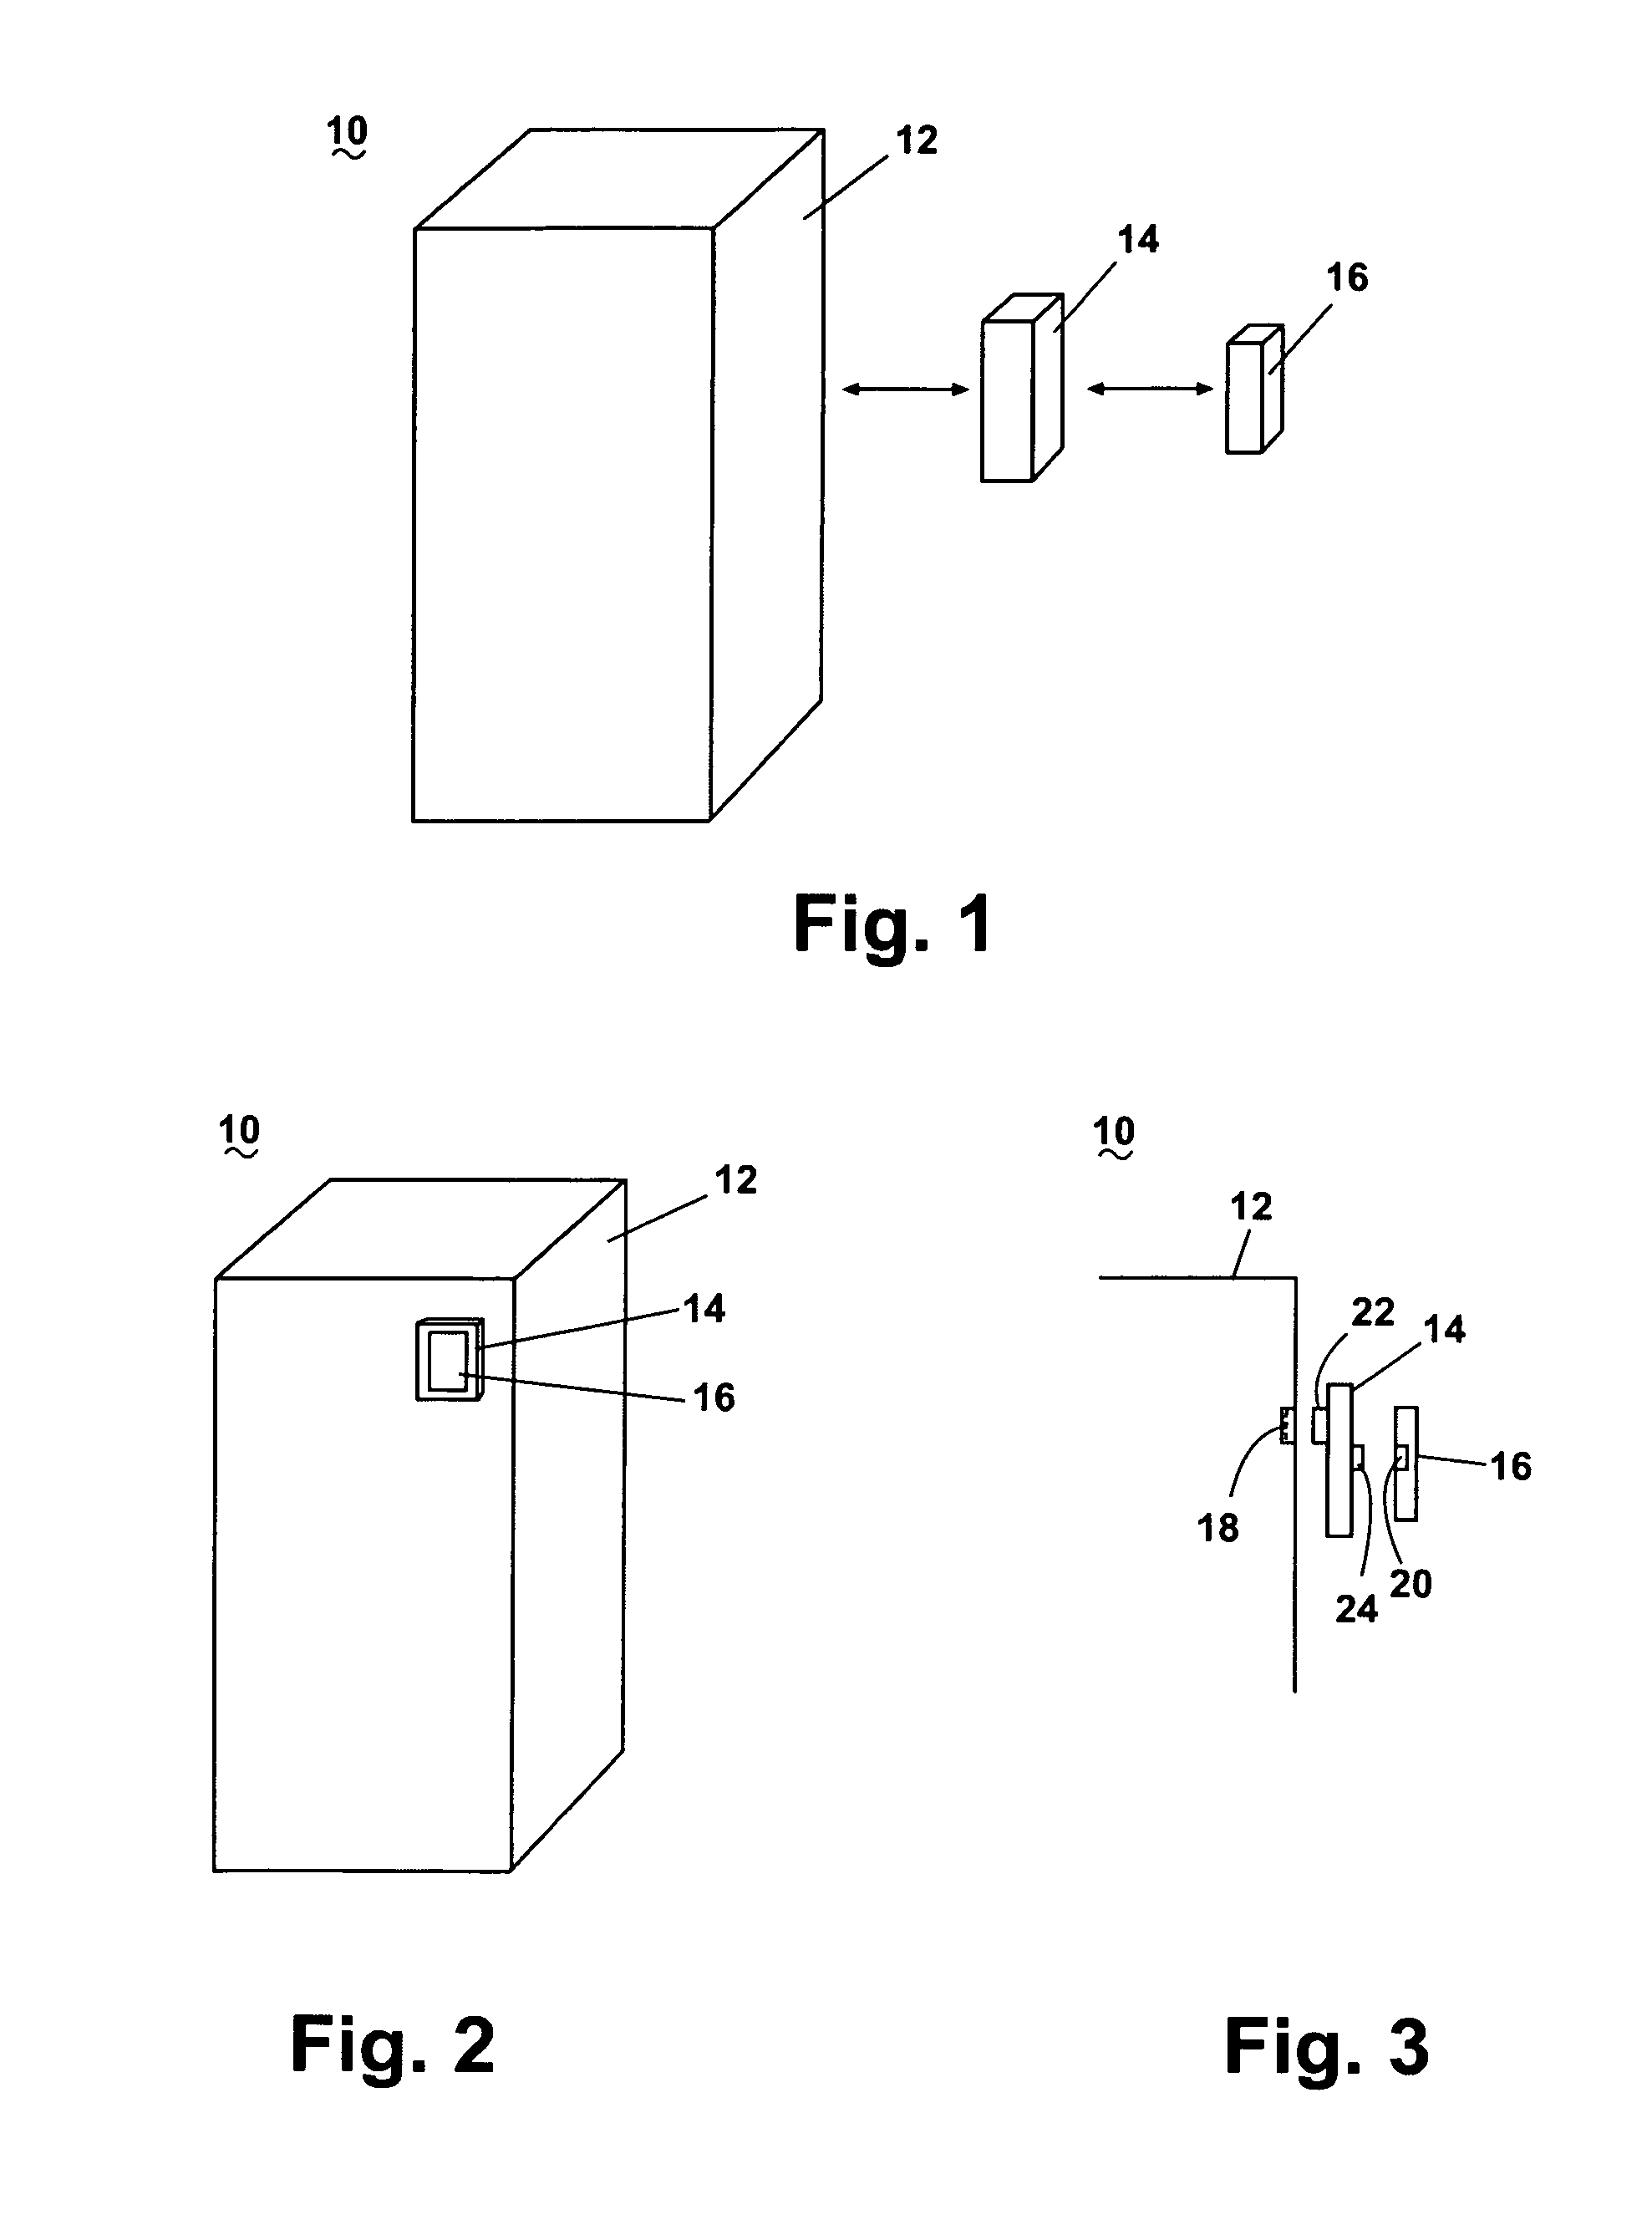 Adapter with an access panel for an electronic device